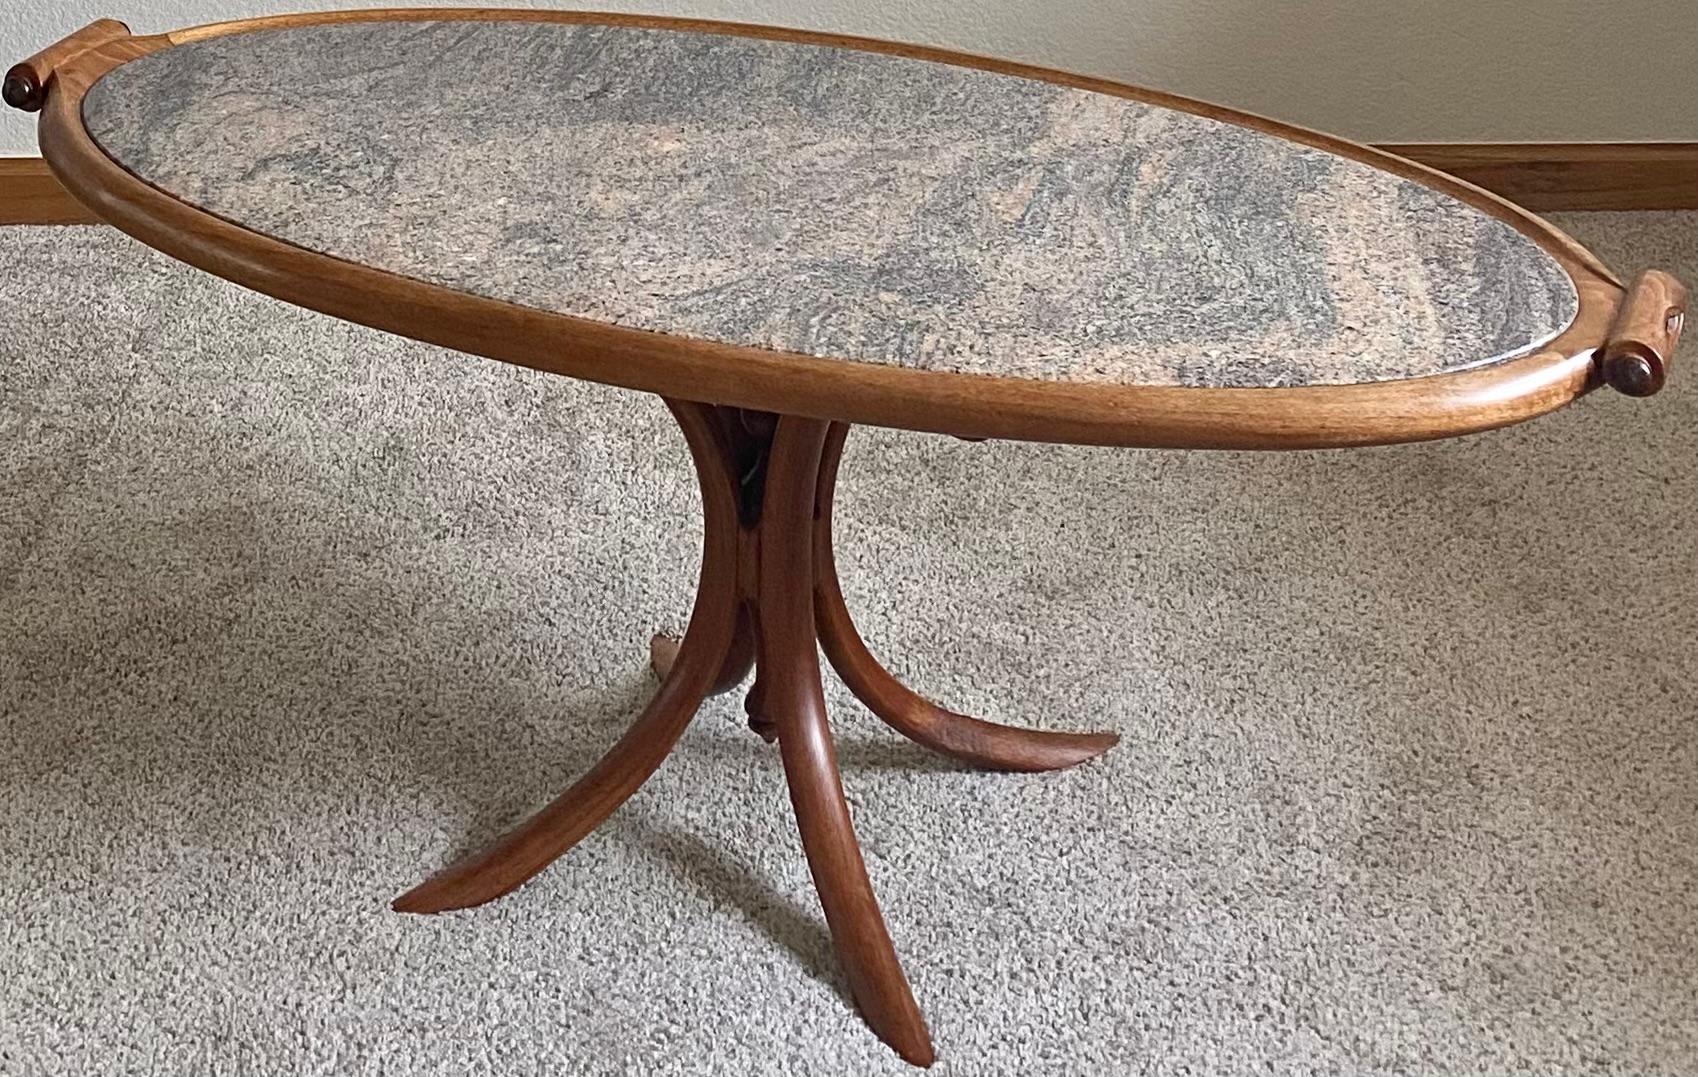 One of Kind, Studio Craft, Sculptural Cocktail Table in Walnut, Cherry + Wenge In Good Condition For Sale In Fort Collins, CO